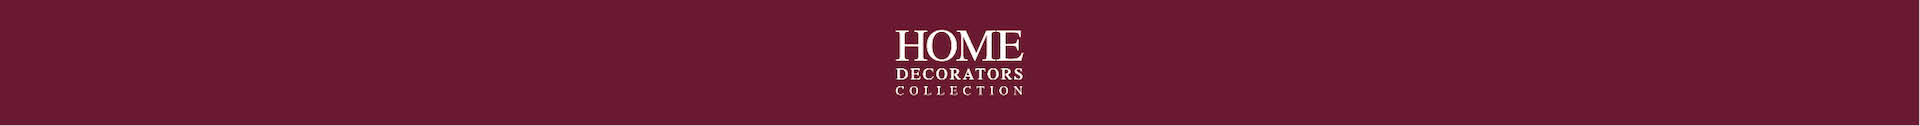  Home  Decorators  Collection Noble  Oak  7 5 in x 47 6 in 